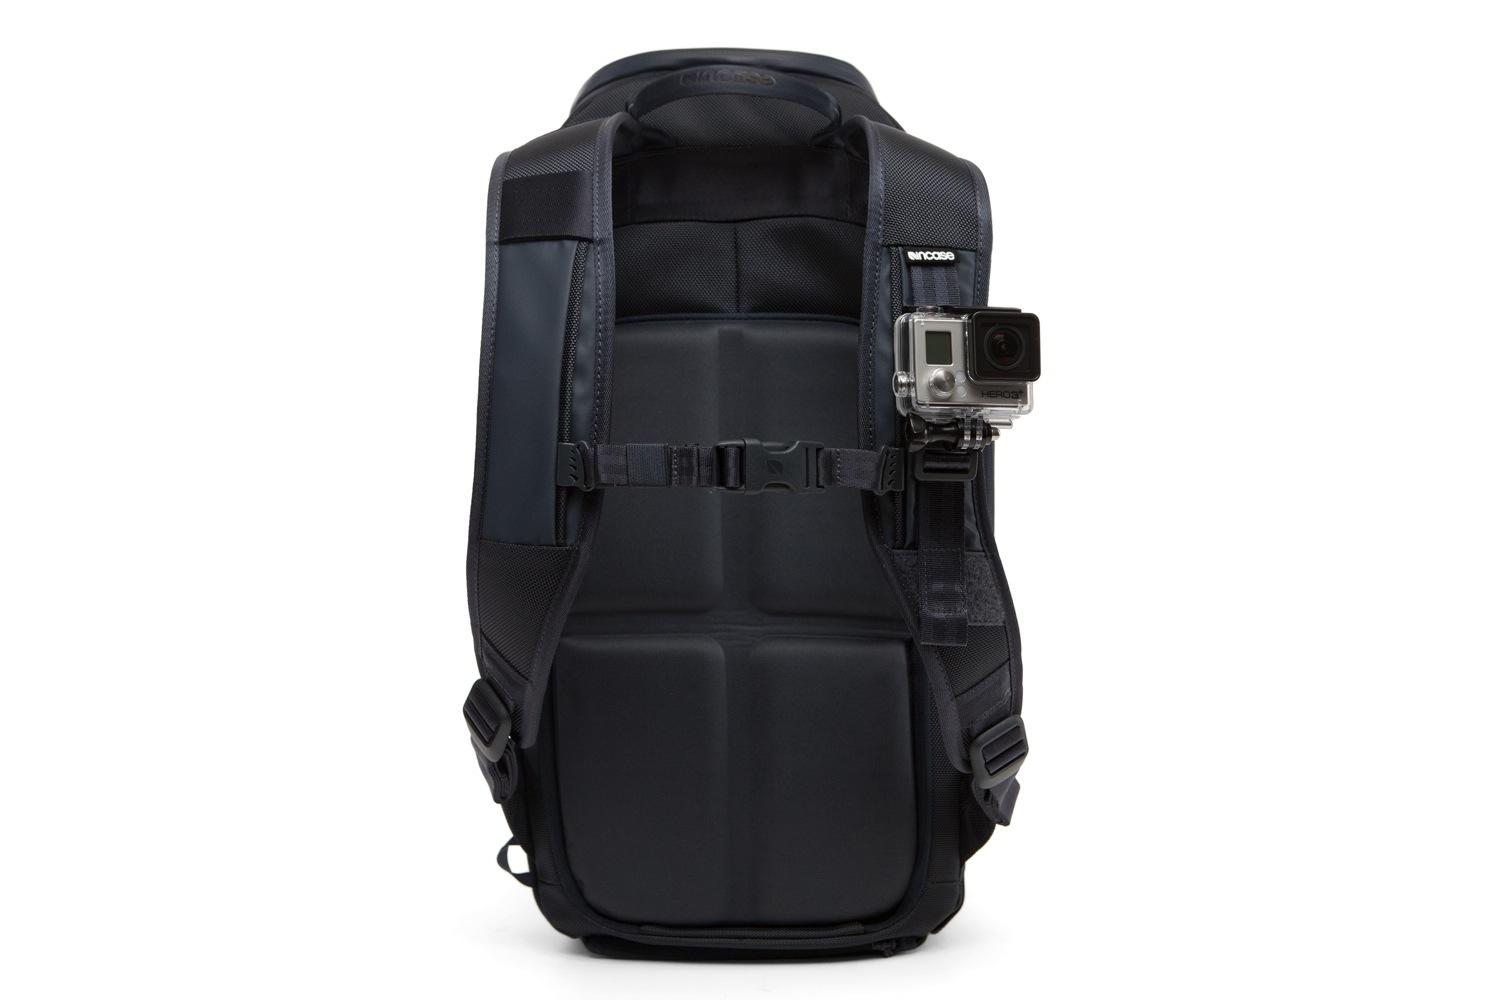 incases new gopro backpack pays homage to pro surfer kelly slater incase 4